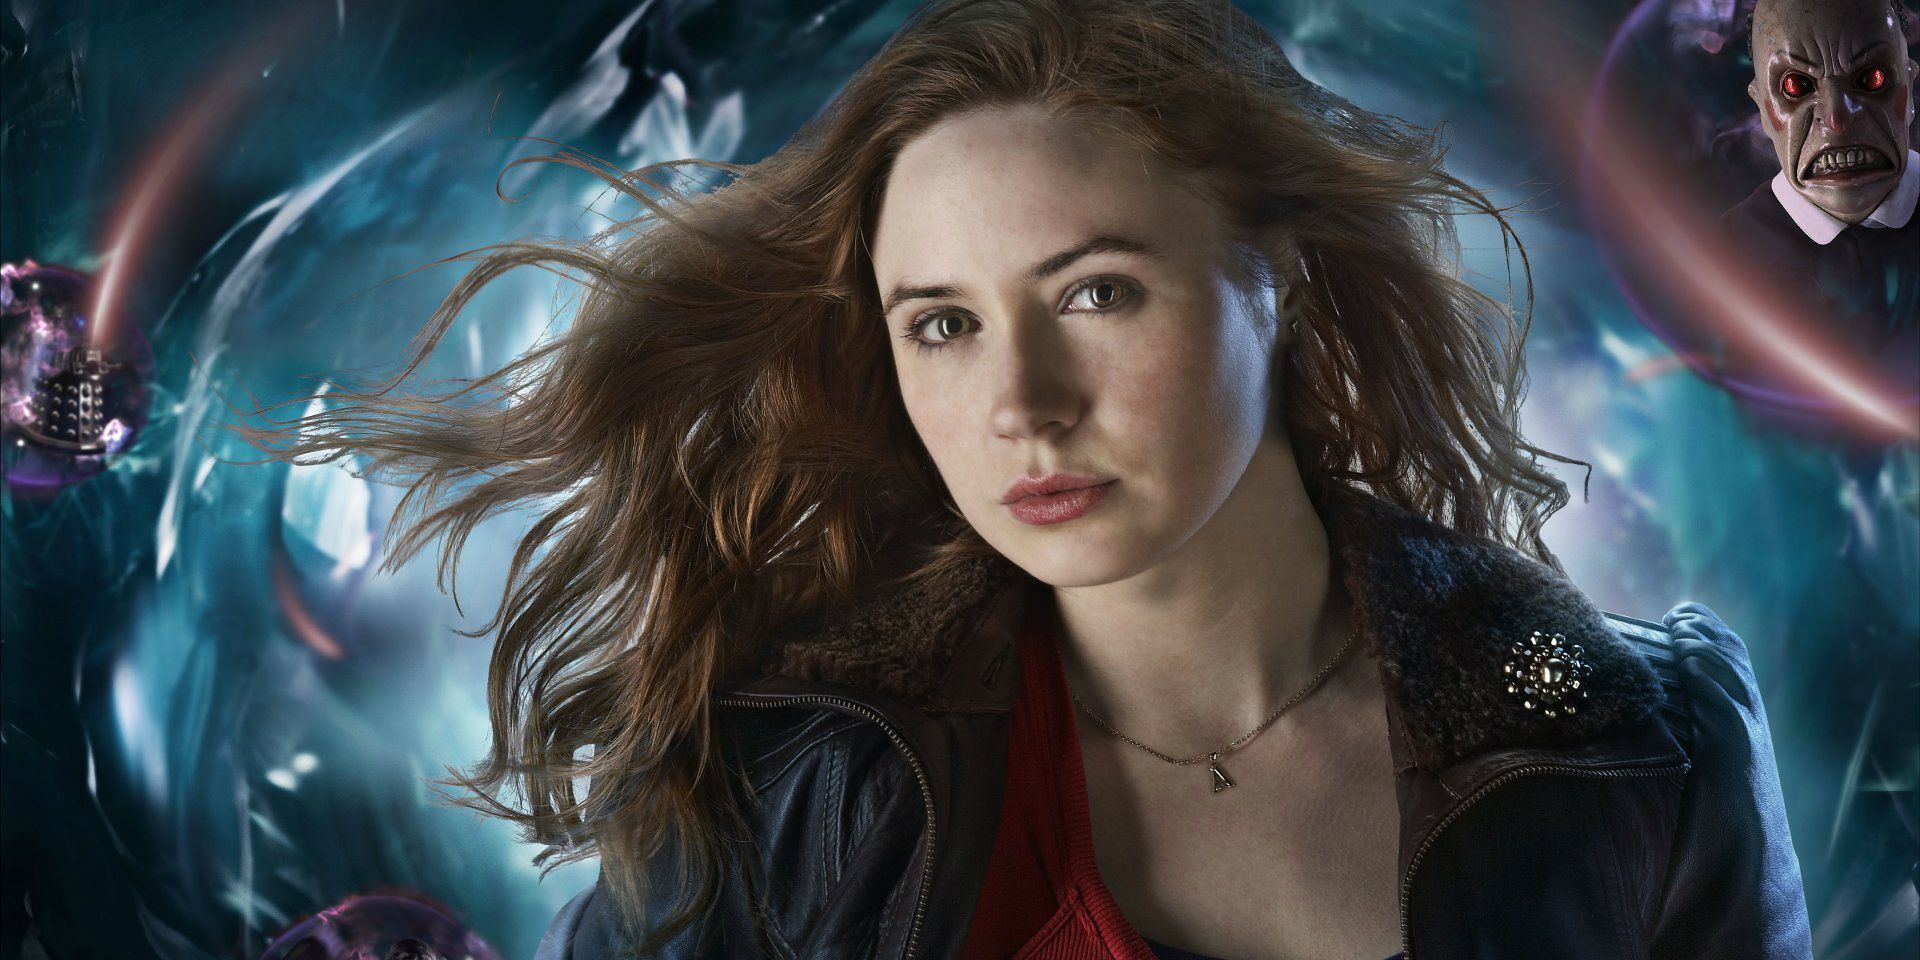 Amy Pond on a promo poster for Doctor Who